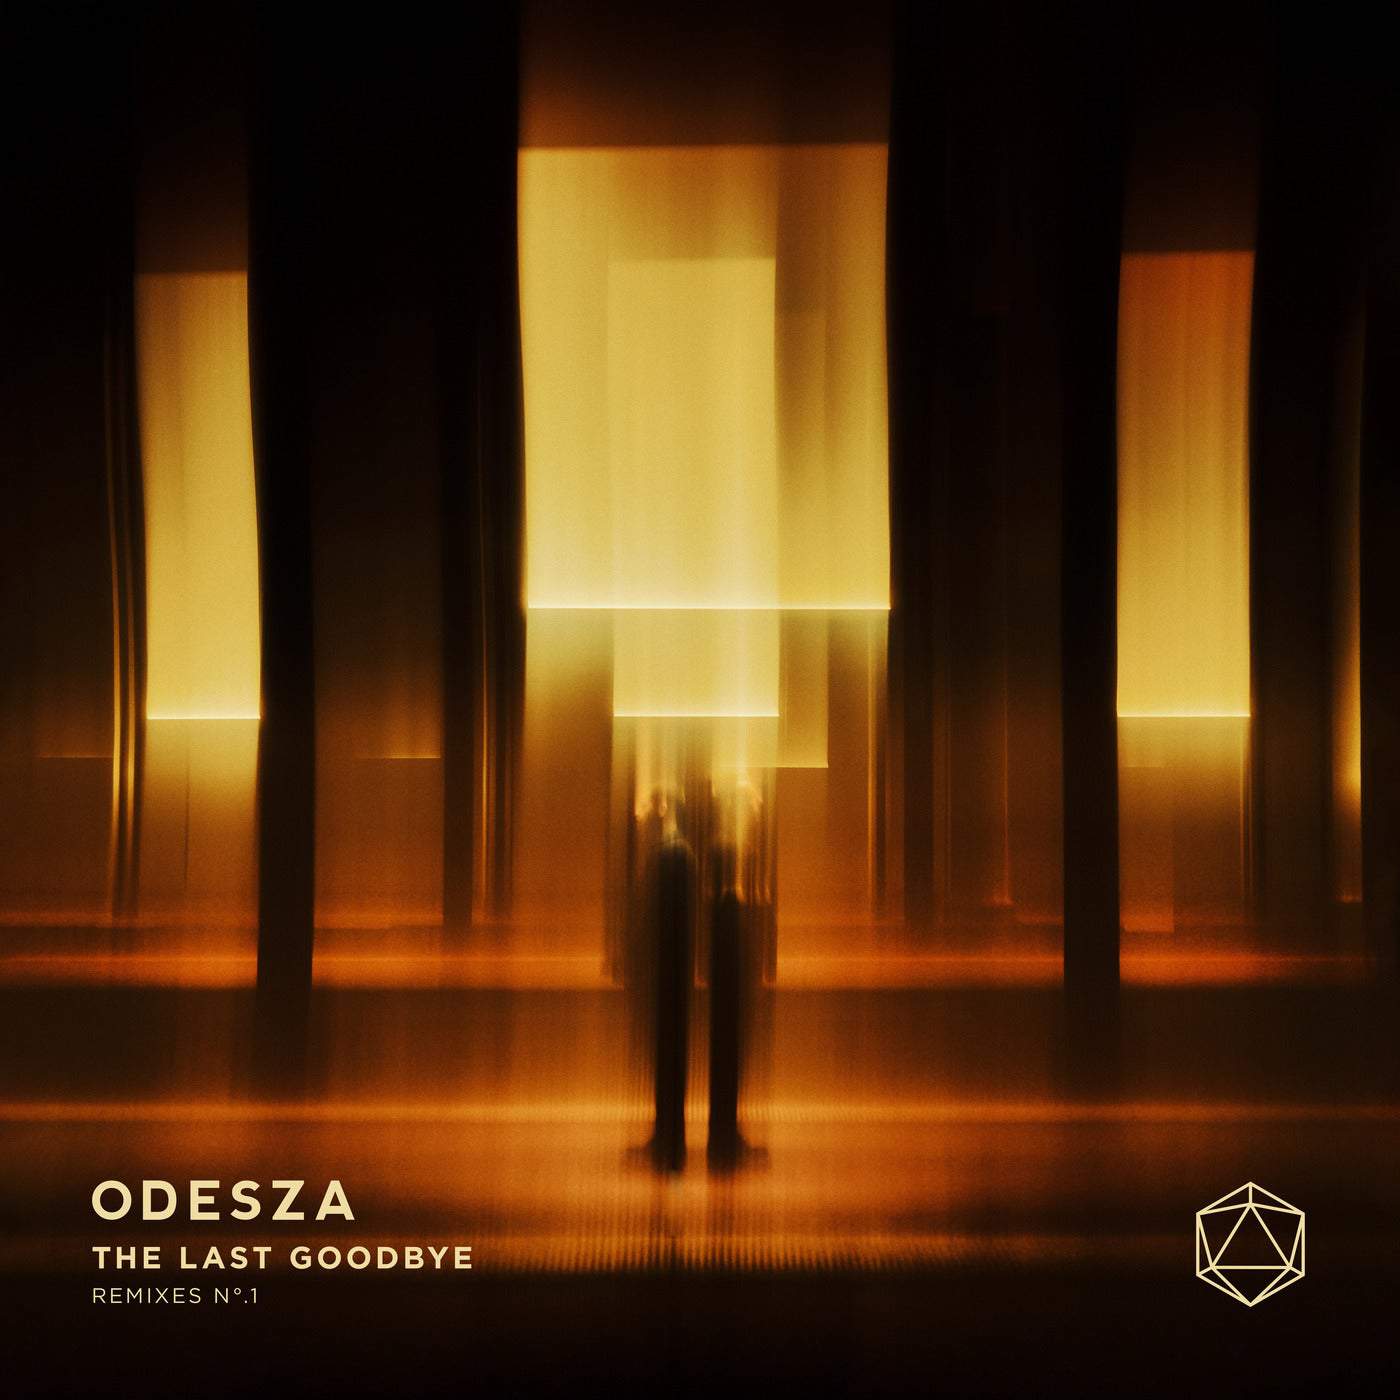 Download ODESZA - The Last Goodbye Remixes N°.1 on Electrobuzz